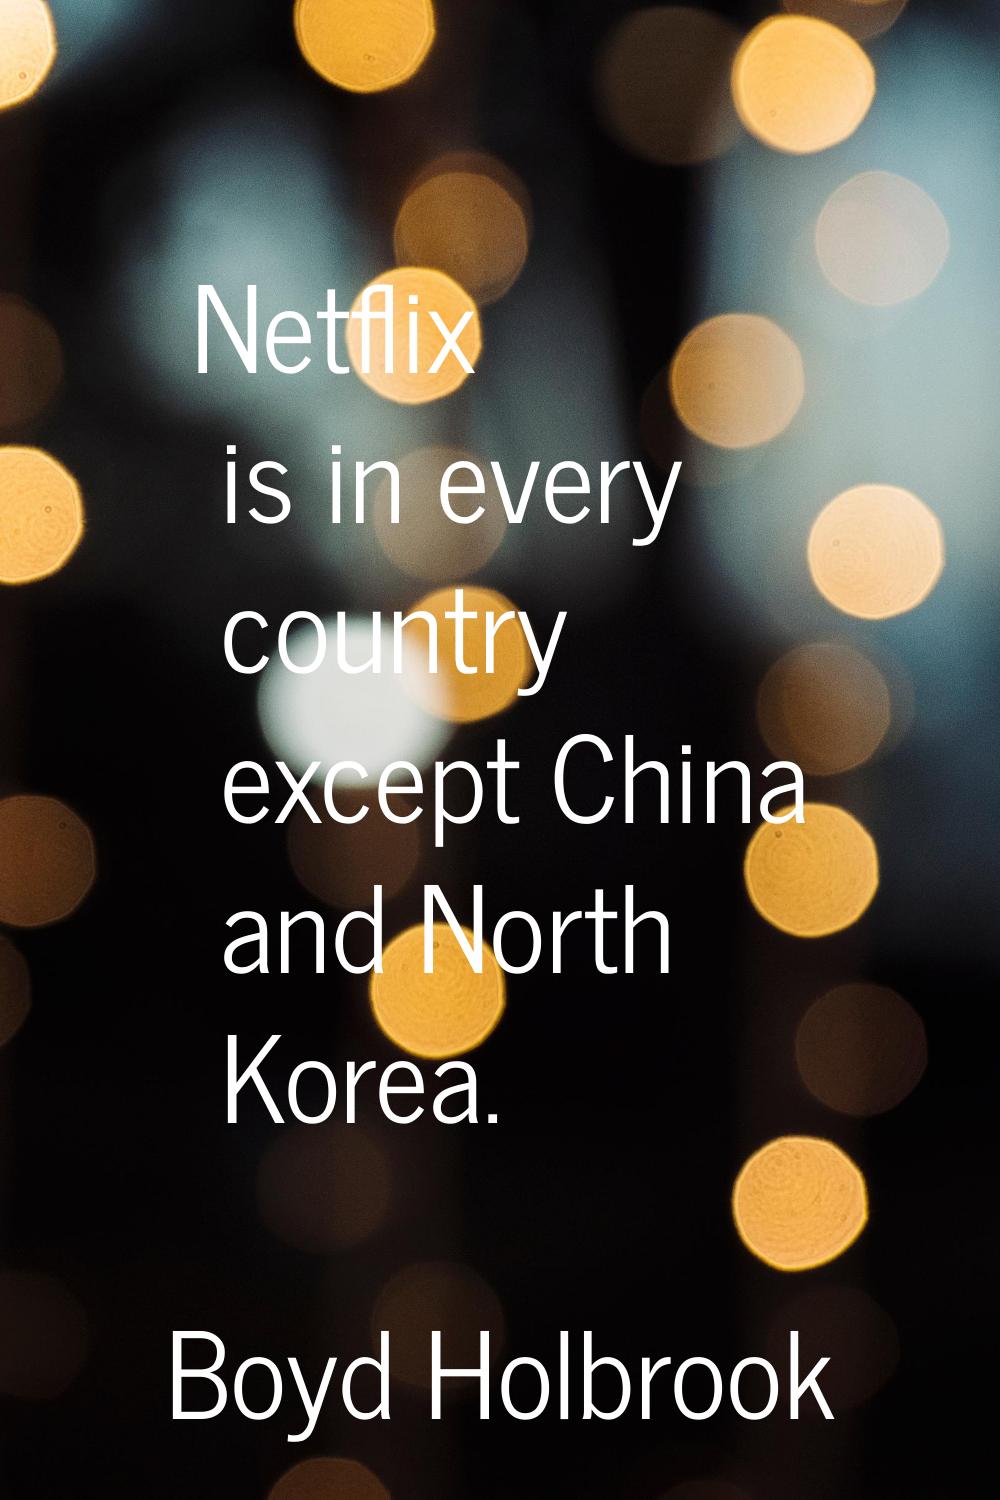 Netflix is in every country except China and North Korea.